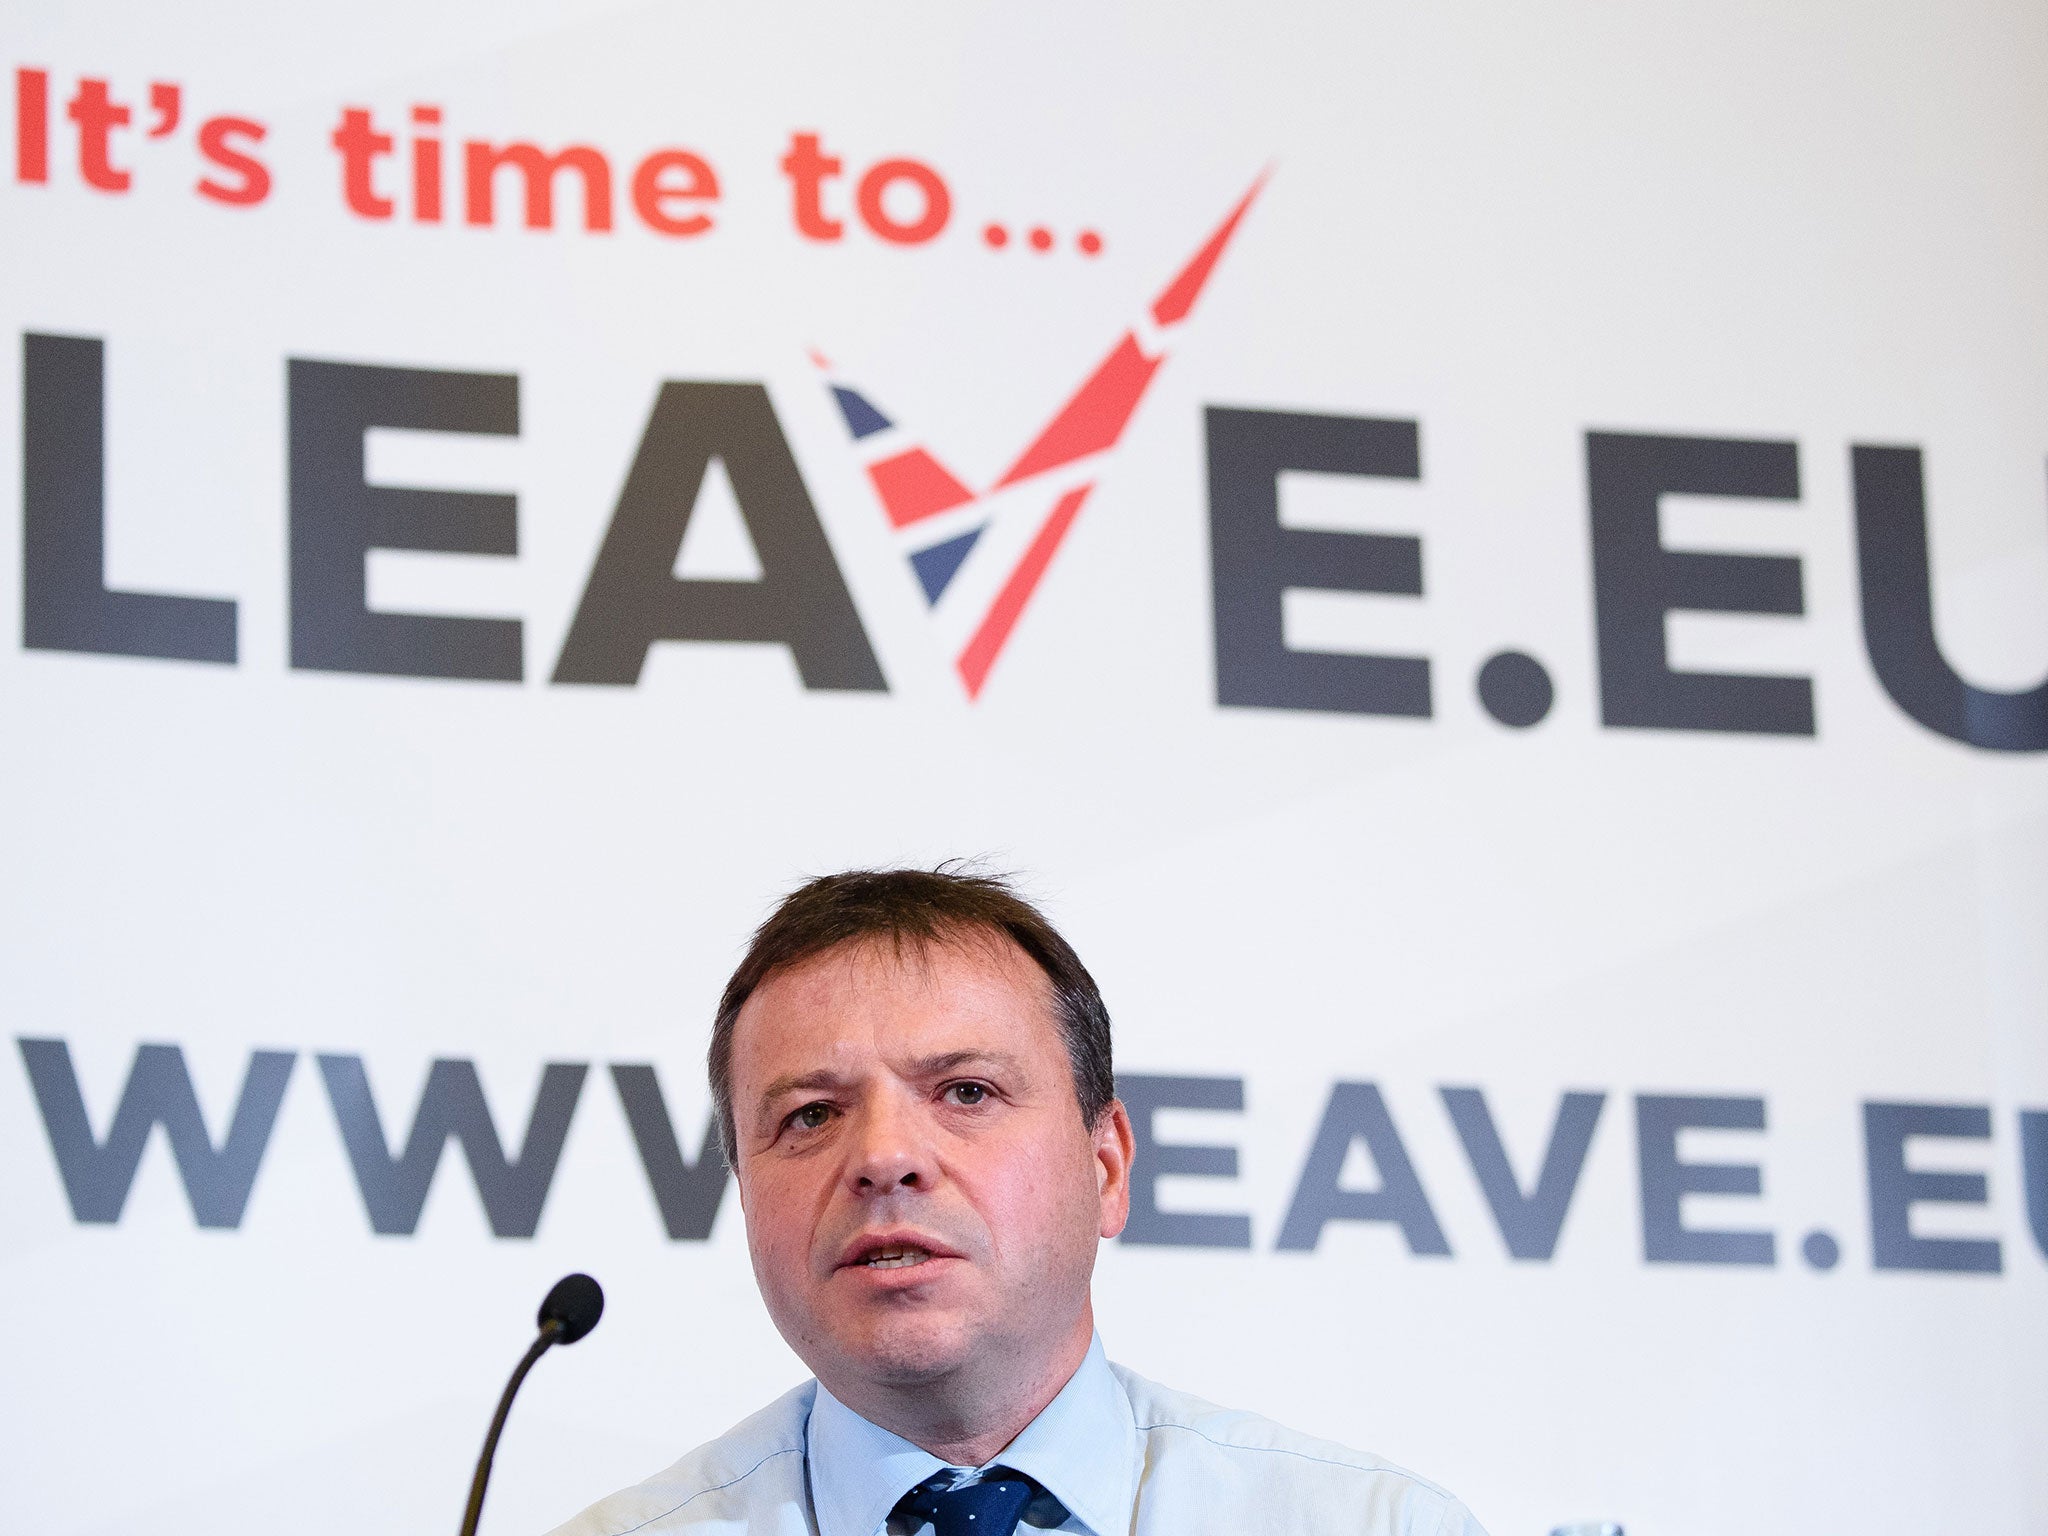 Arron Banks, the founder of Leave.EU, has refused a merger with the rival Vote Leave campaign